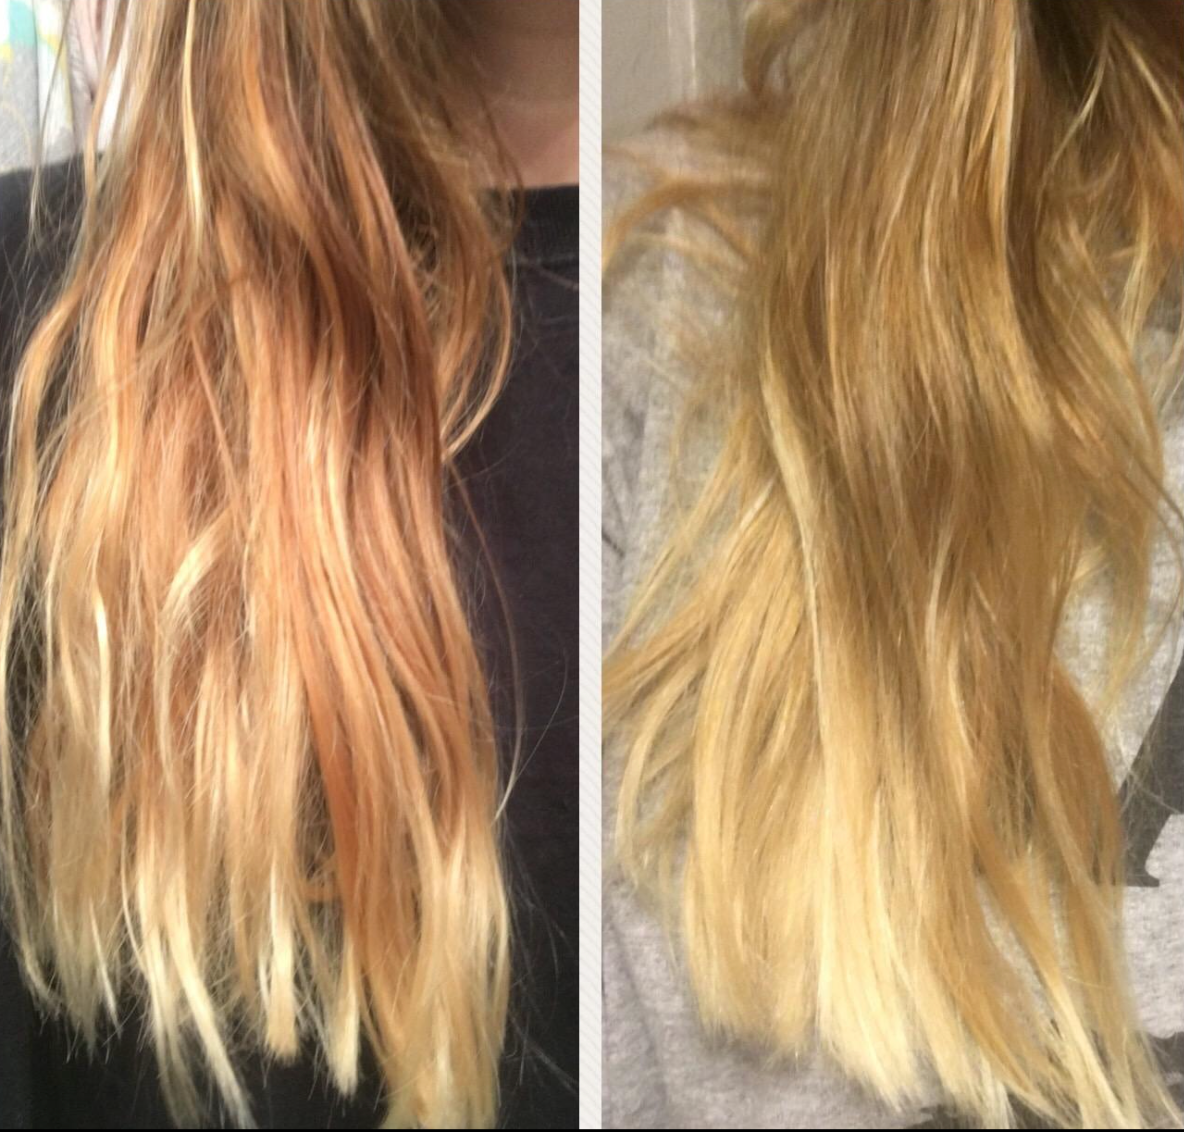 Reviewer's hair before using the pillow with less volume, and after using it with more 